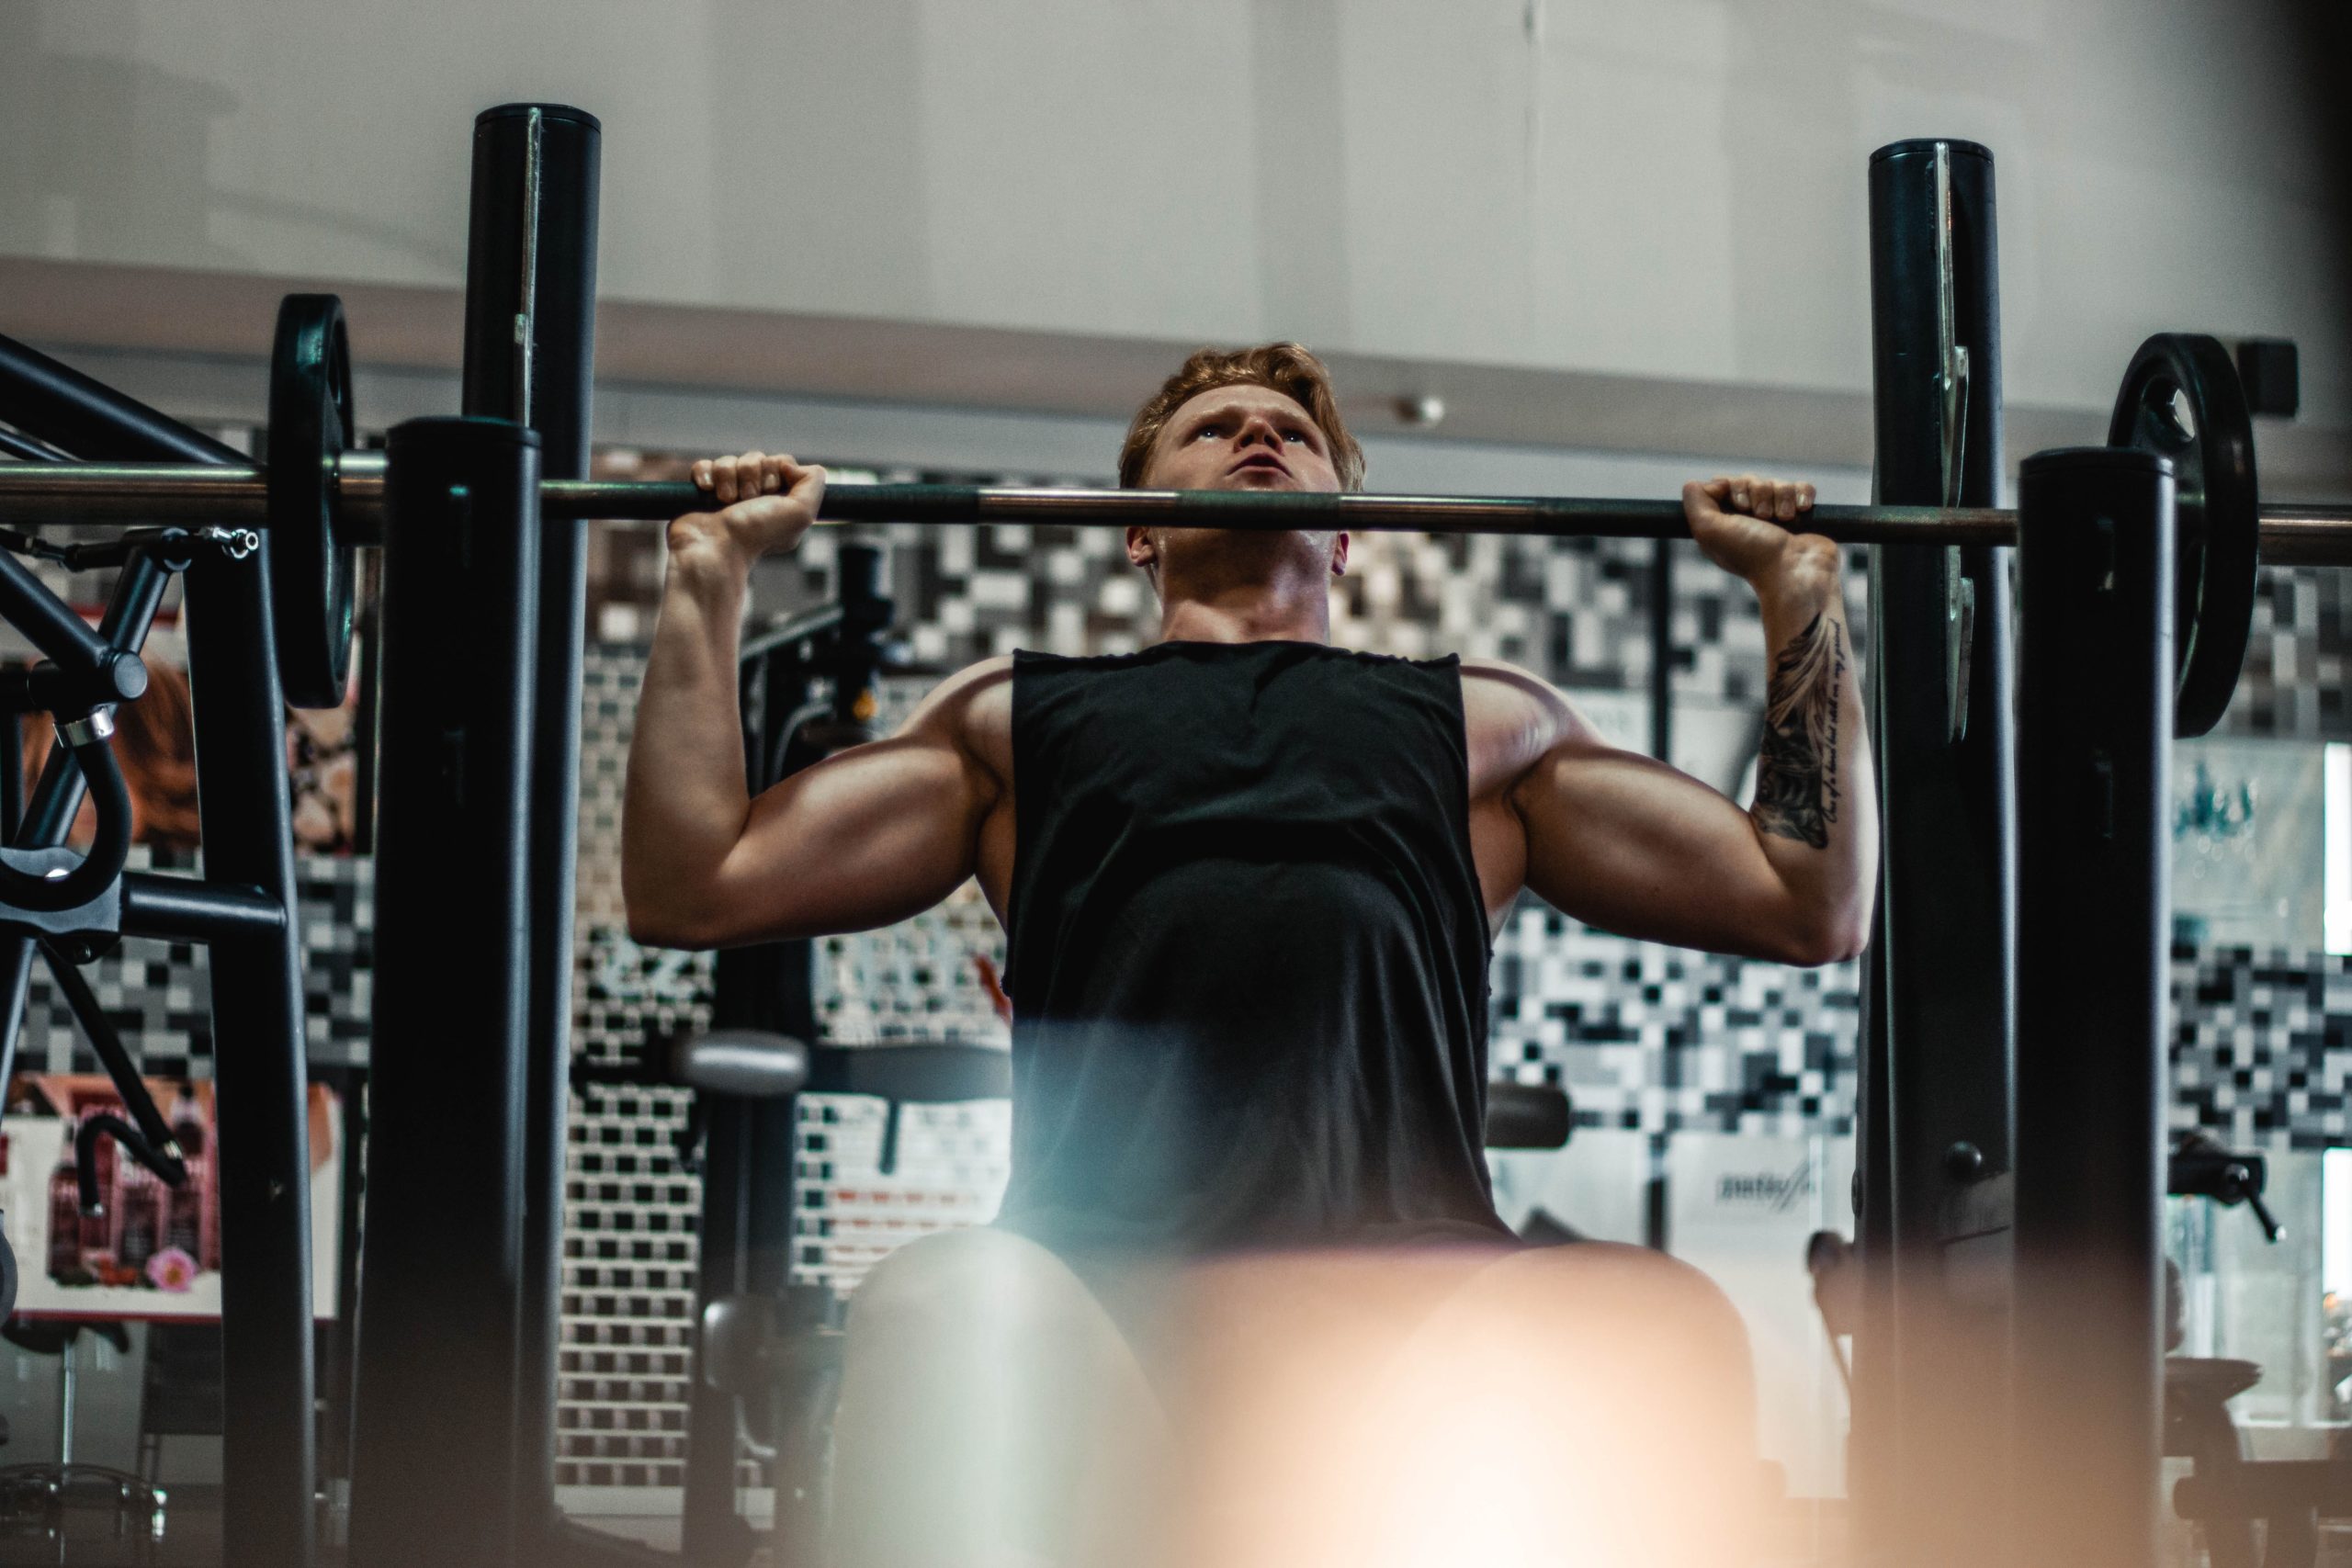 Increase strength with pause rep training